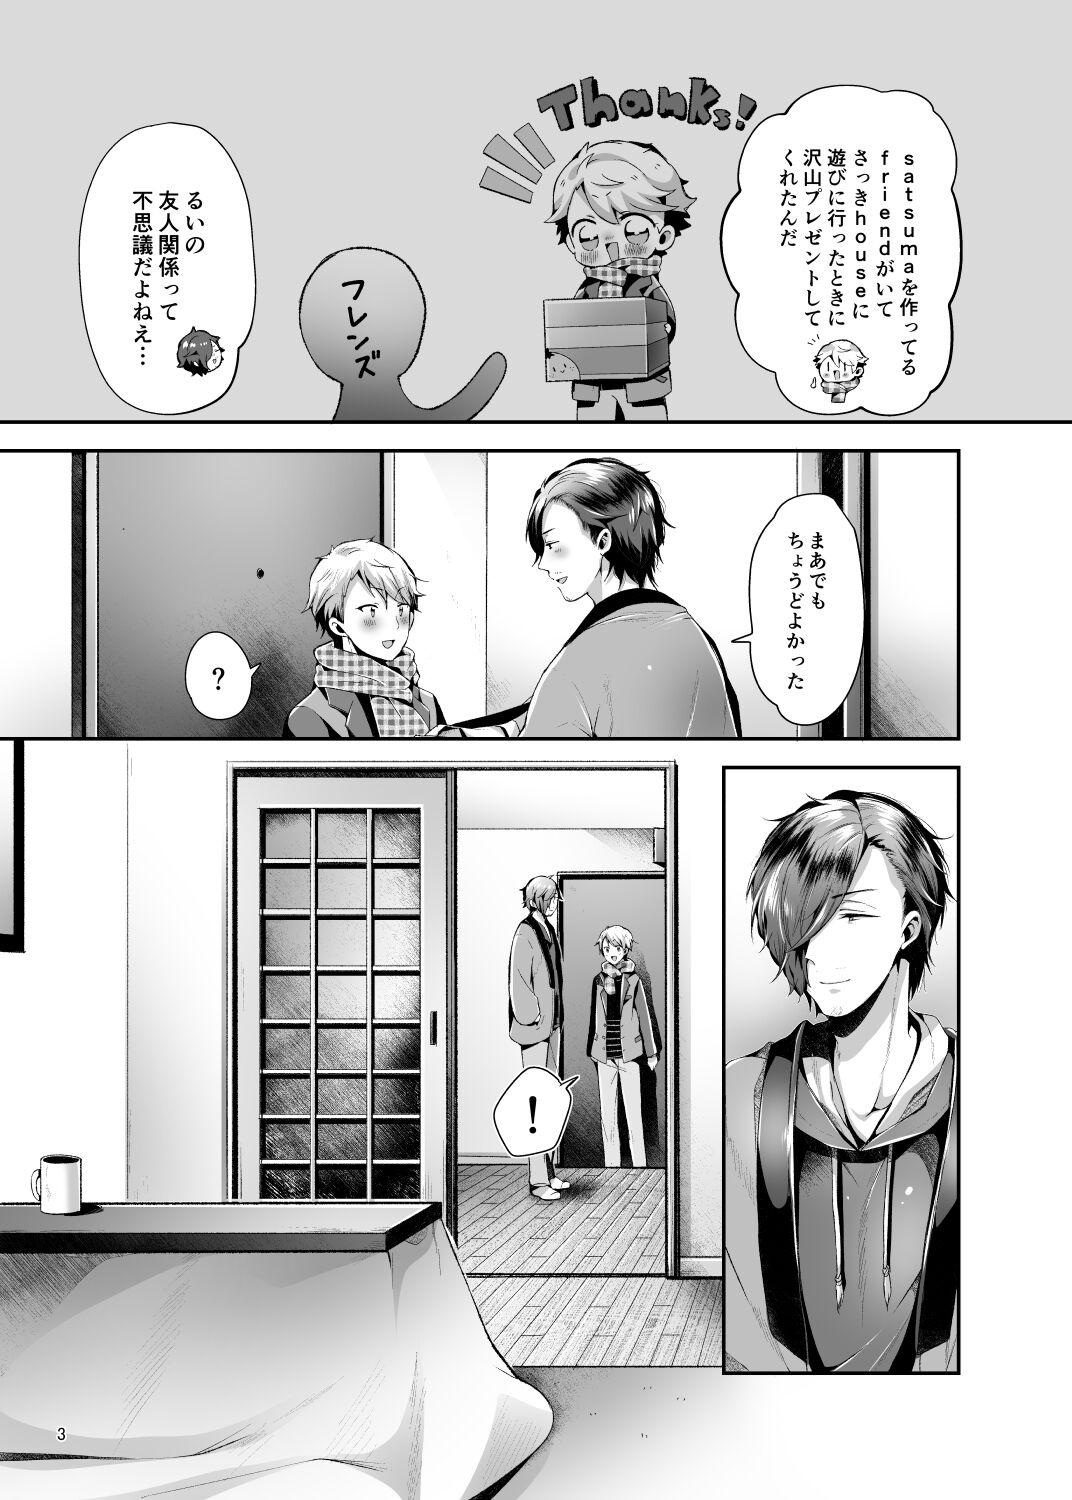 Casa Relax at home - The idolmaster sidem 8teen - Page 4